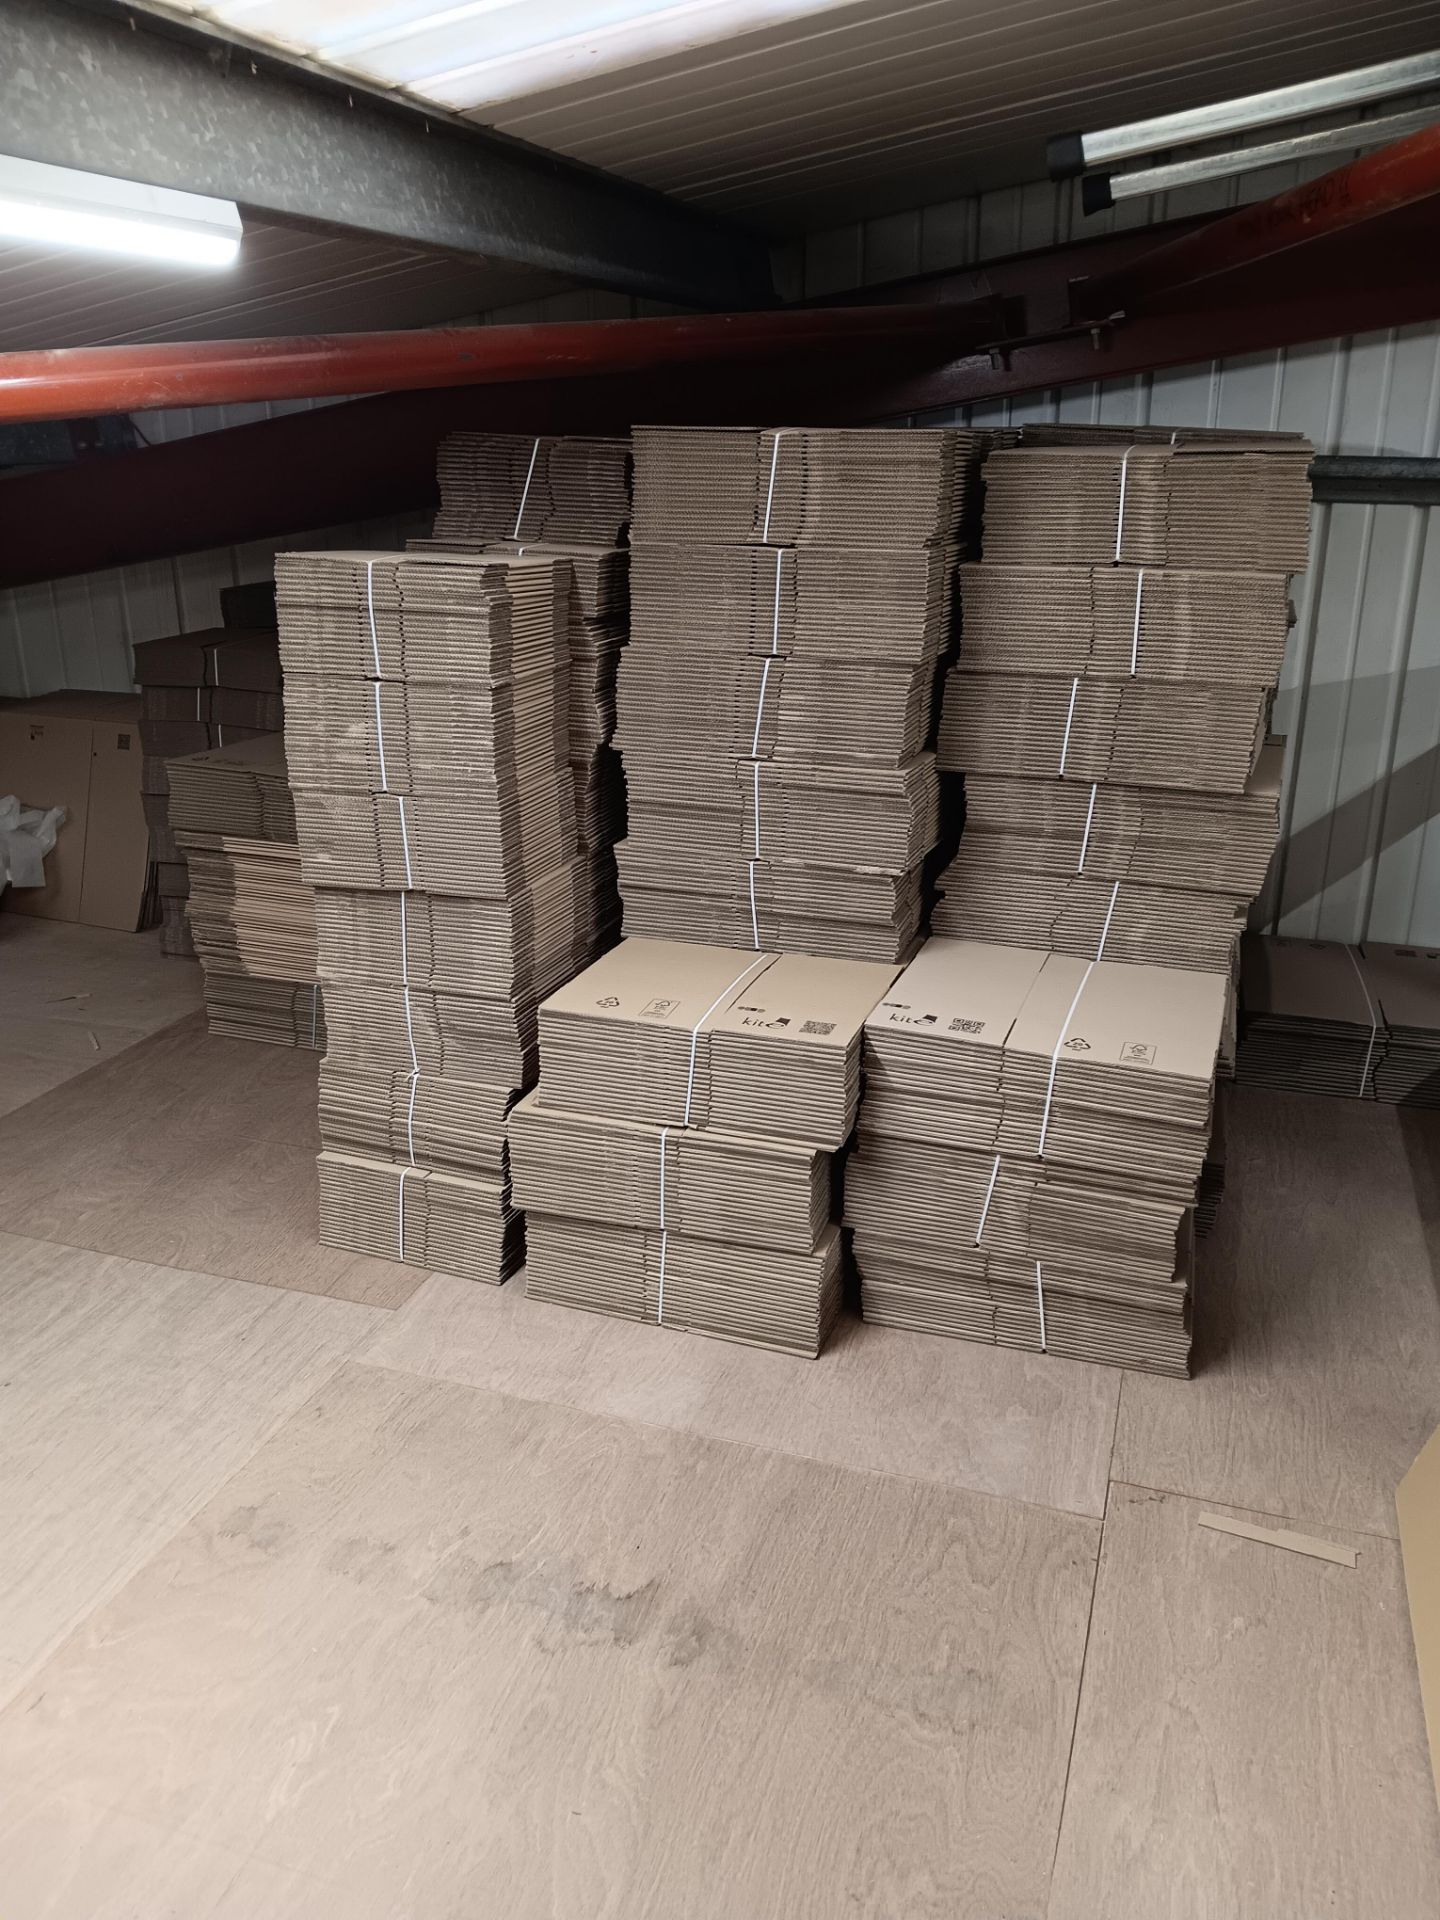 Large quantity of cardboard boxes